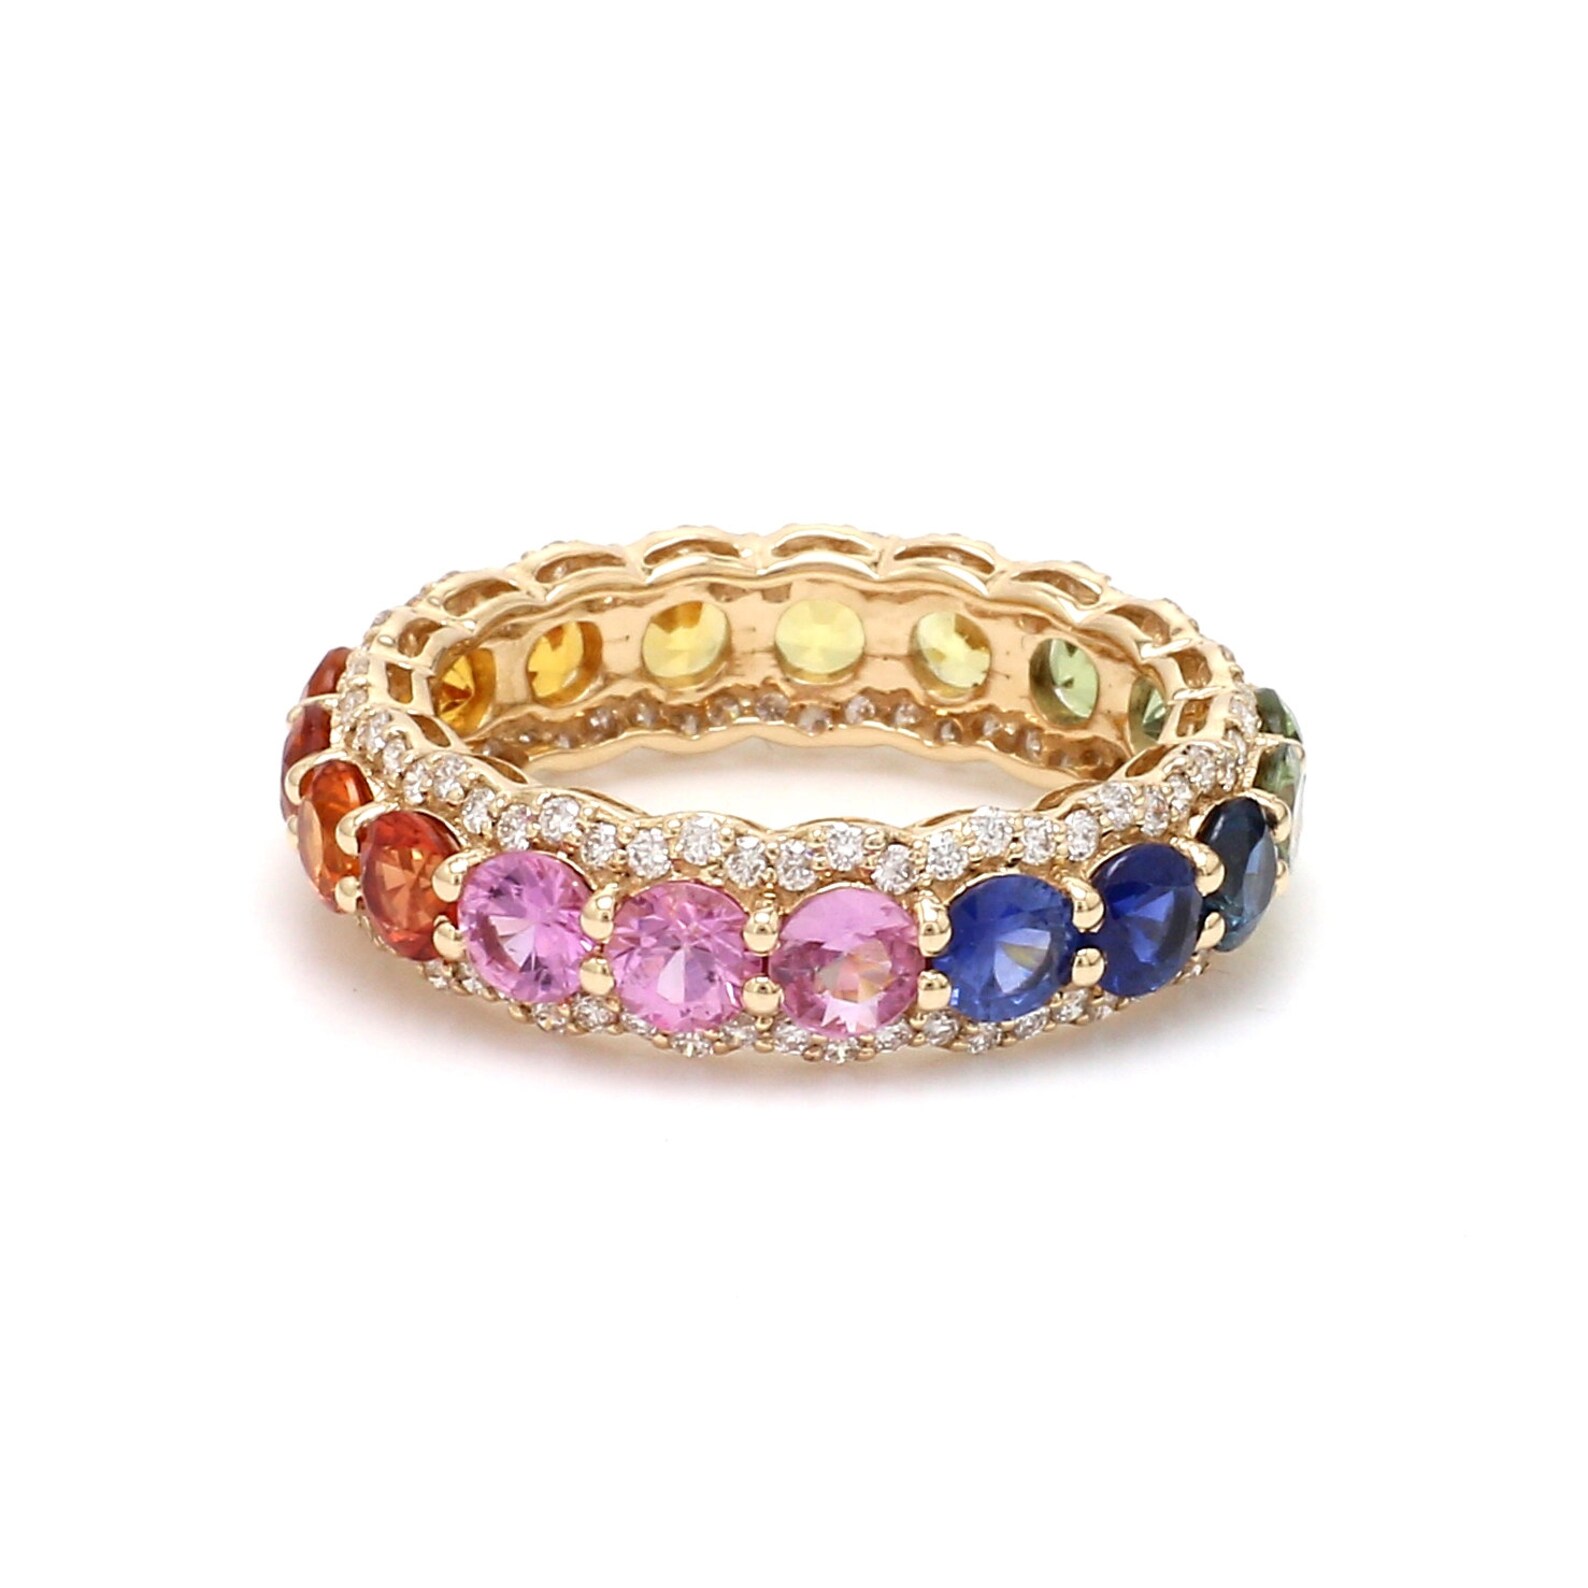 Rainbow sapphire eternity band ring with diamonds in 14k 18k | Etsy